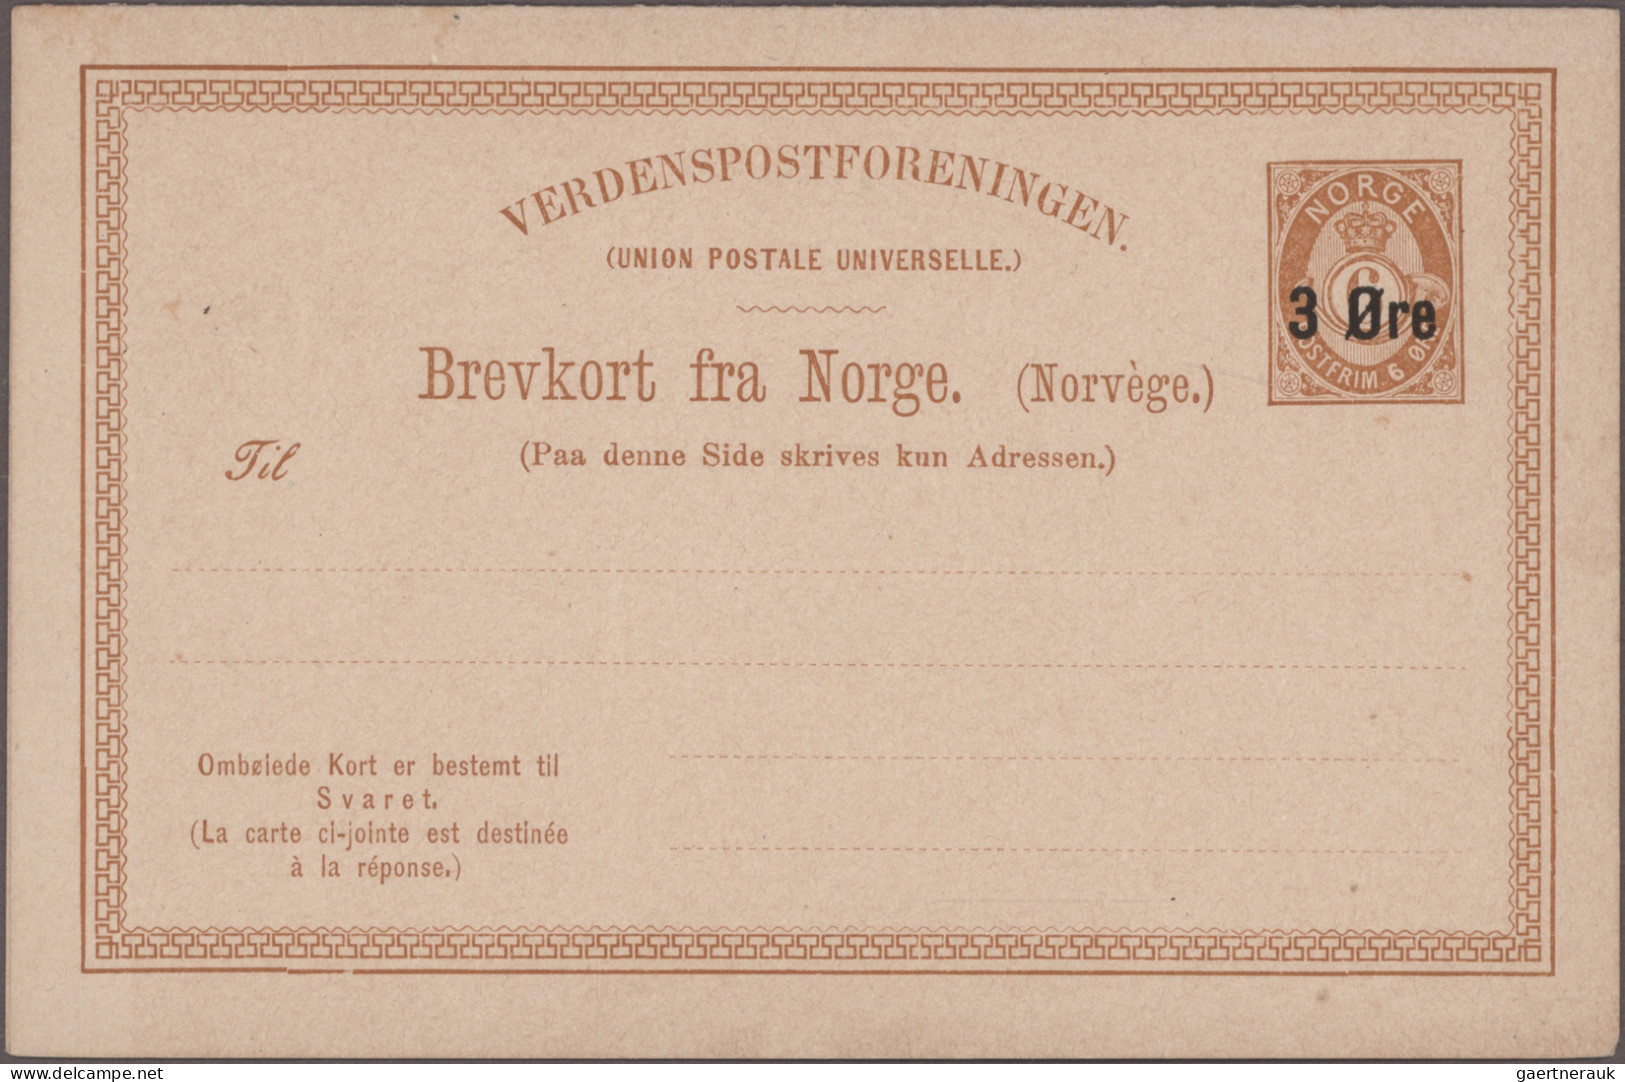 Norway - postal stationery: 1872/1950's Collection of 222 postal stationery card